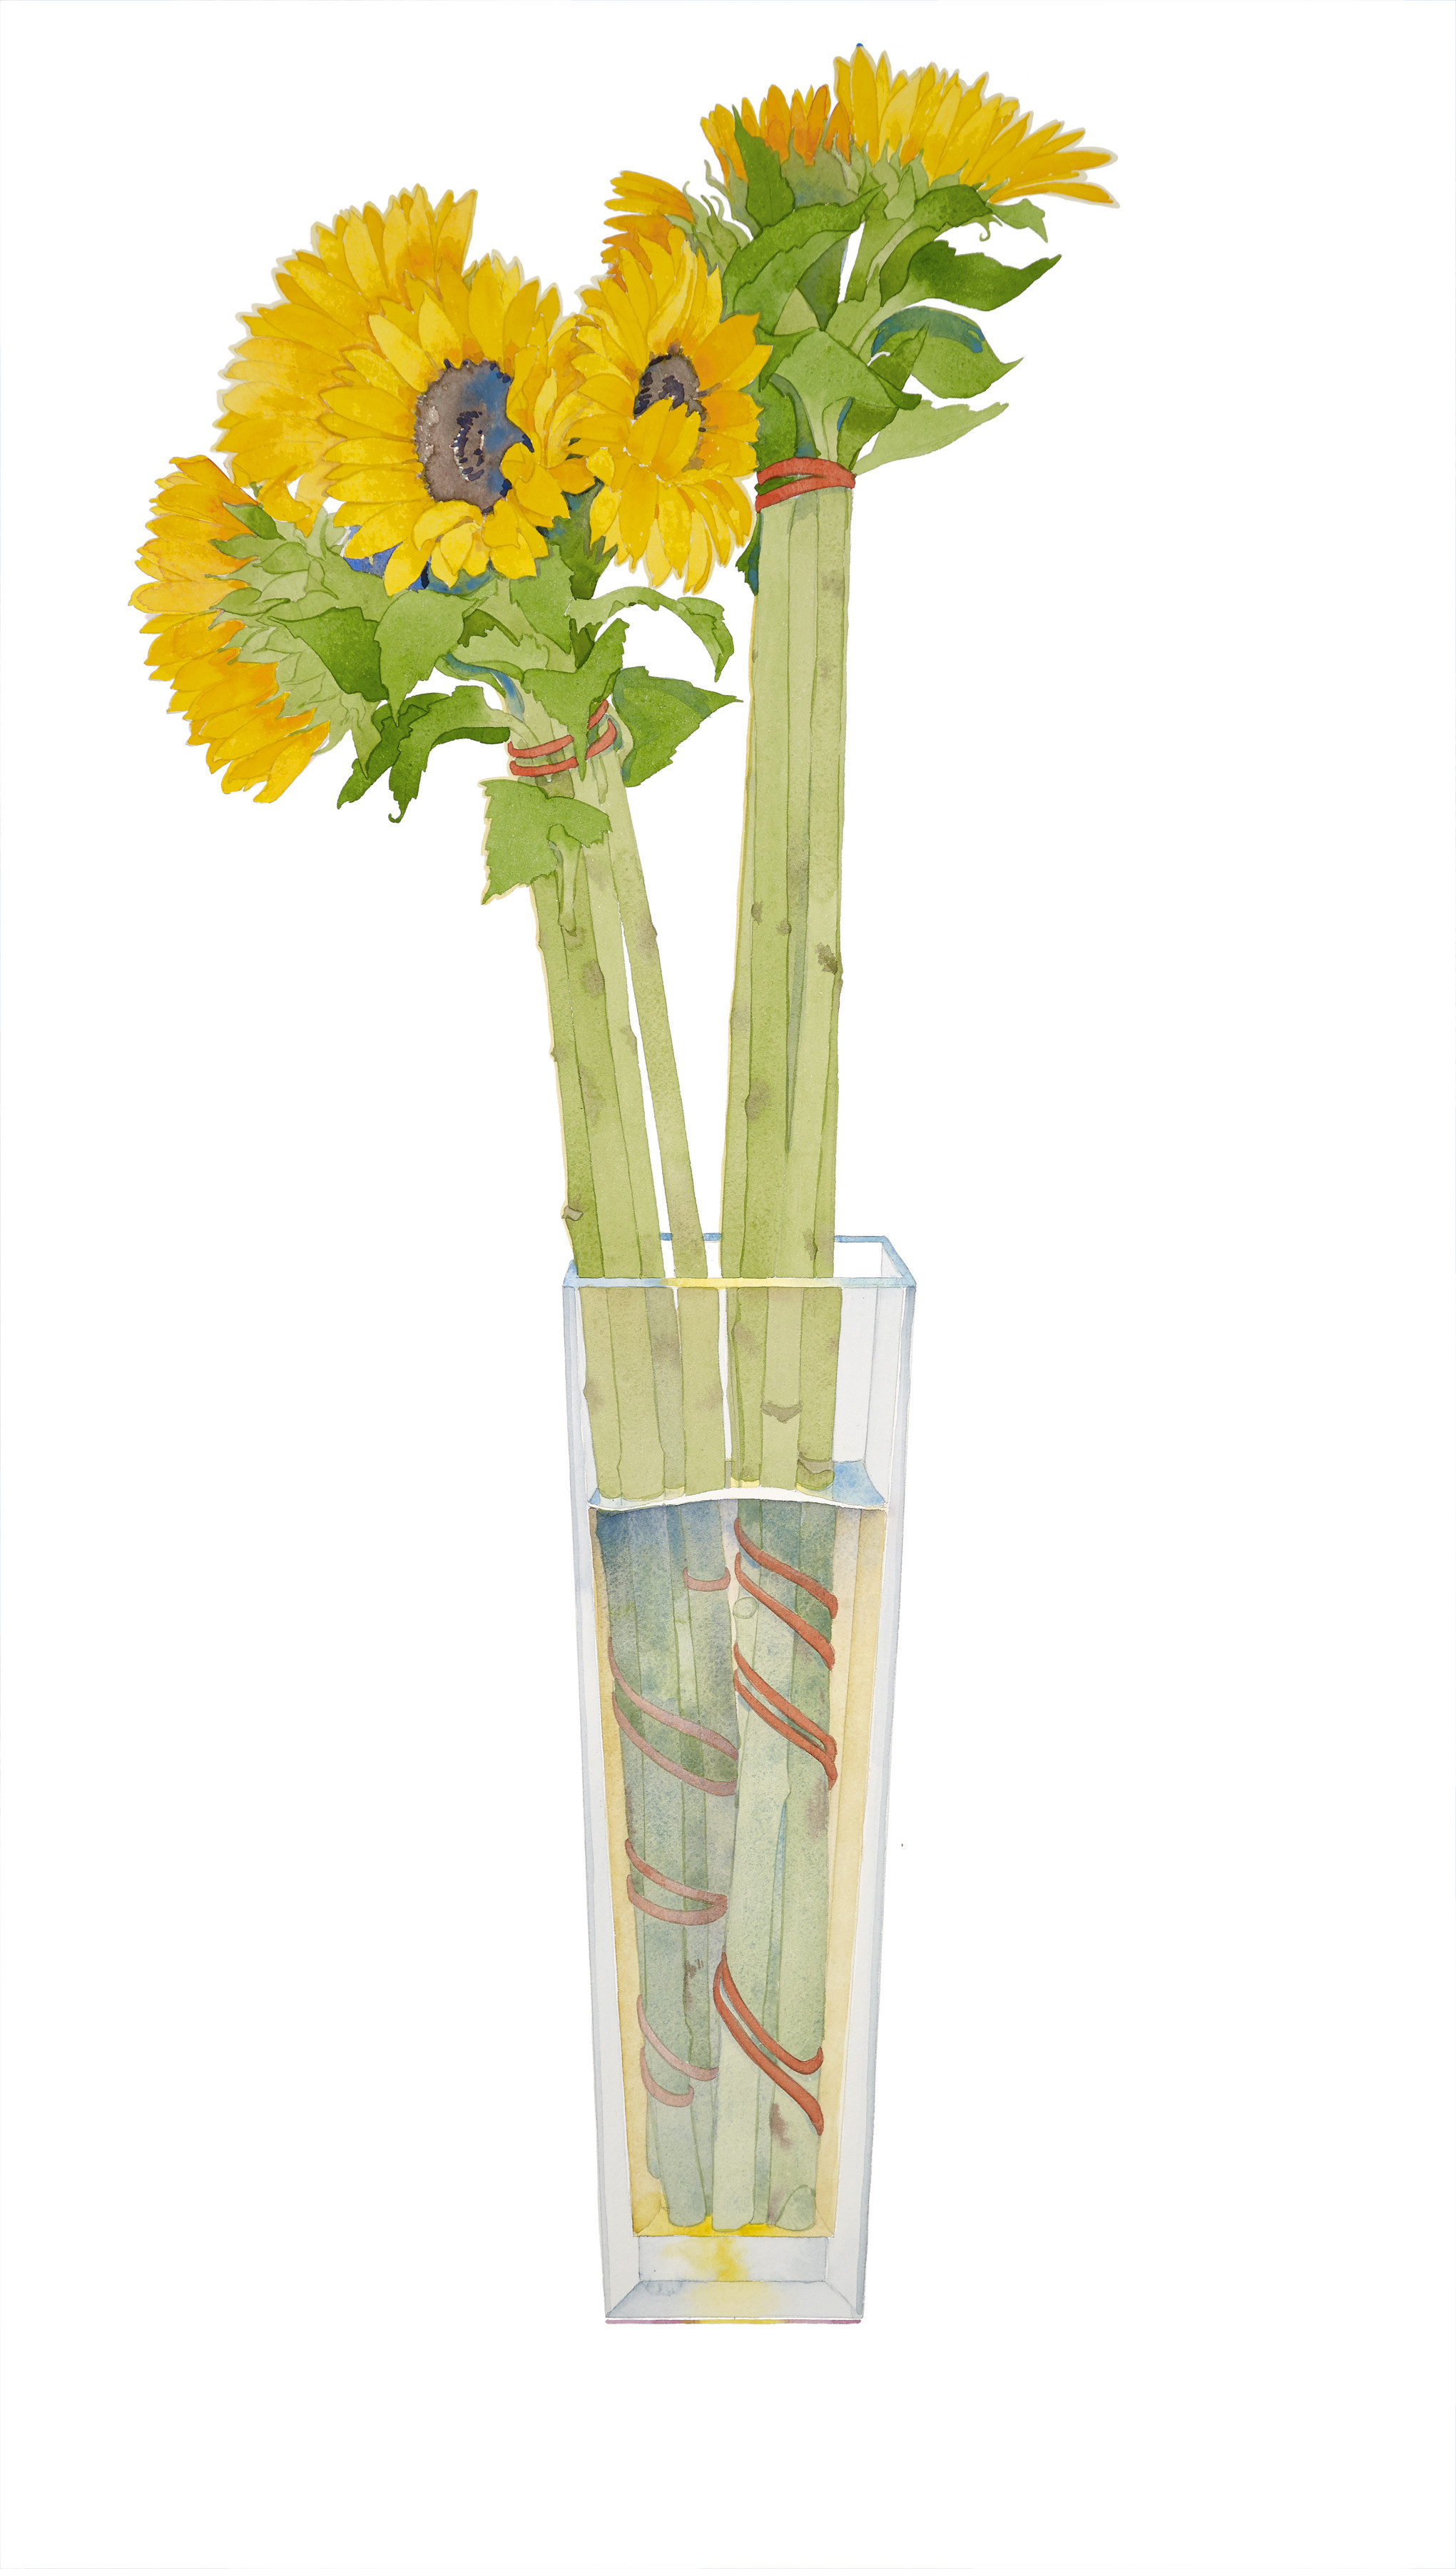 Sunflower in a tall vase, 2018